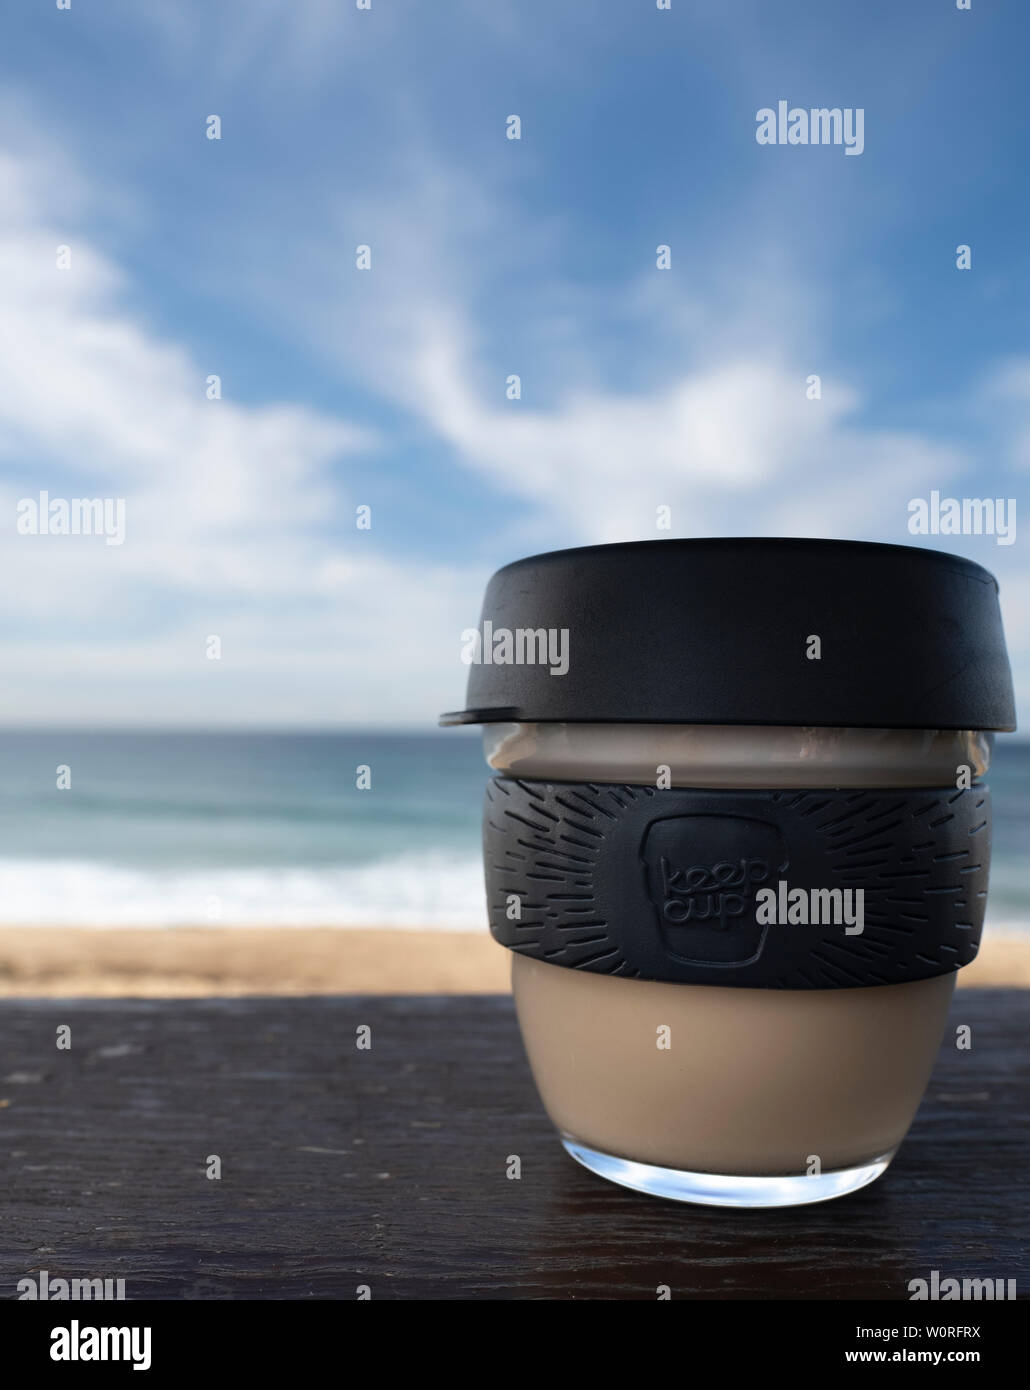 NEWCASTLE, AUSTRALIA - June 16 2019 Close up of a glass Keepcup with black trimming, filled with coffee, on a timber bench with the Pacific Ocean in t Stock Photo